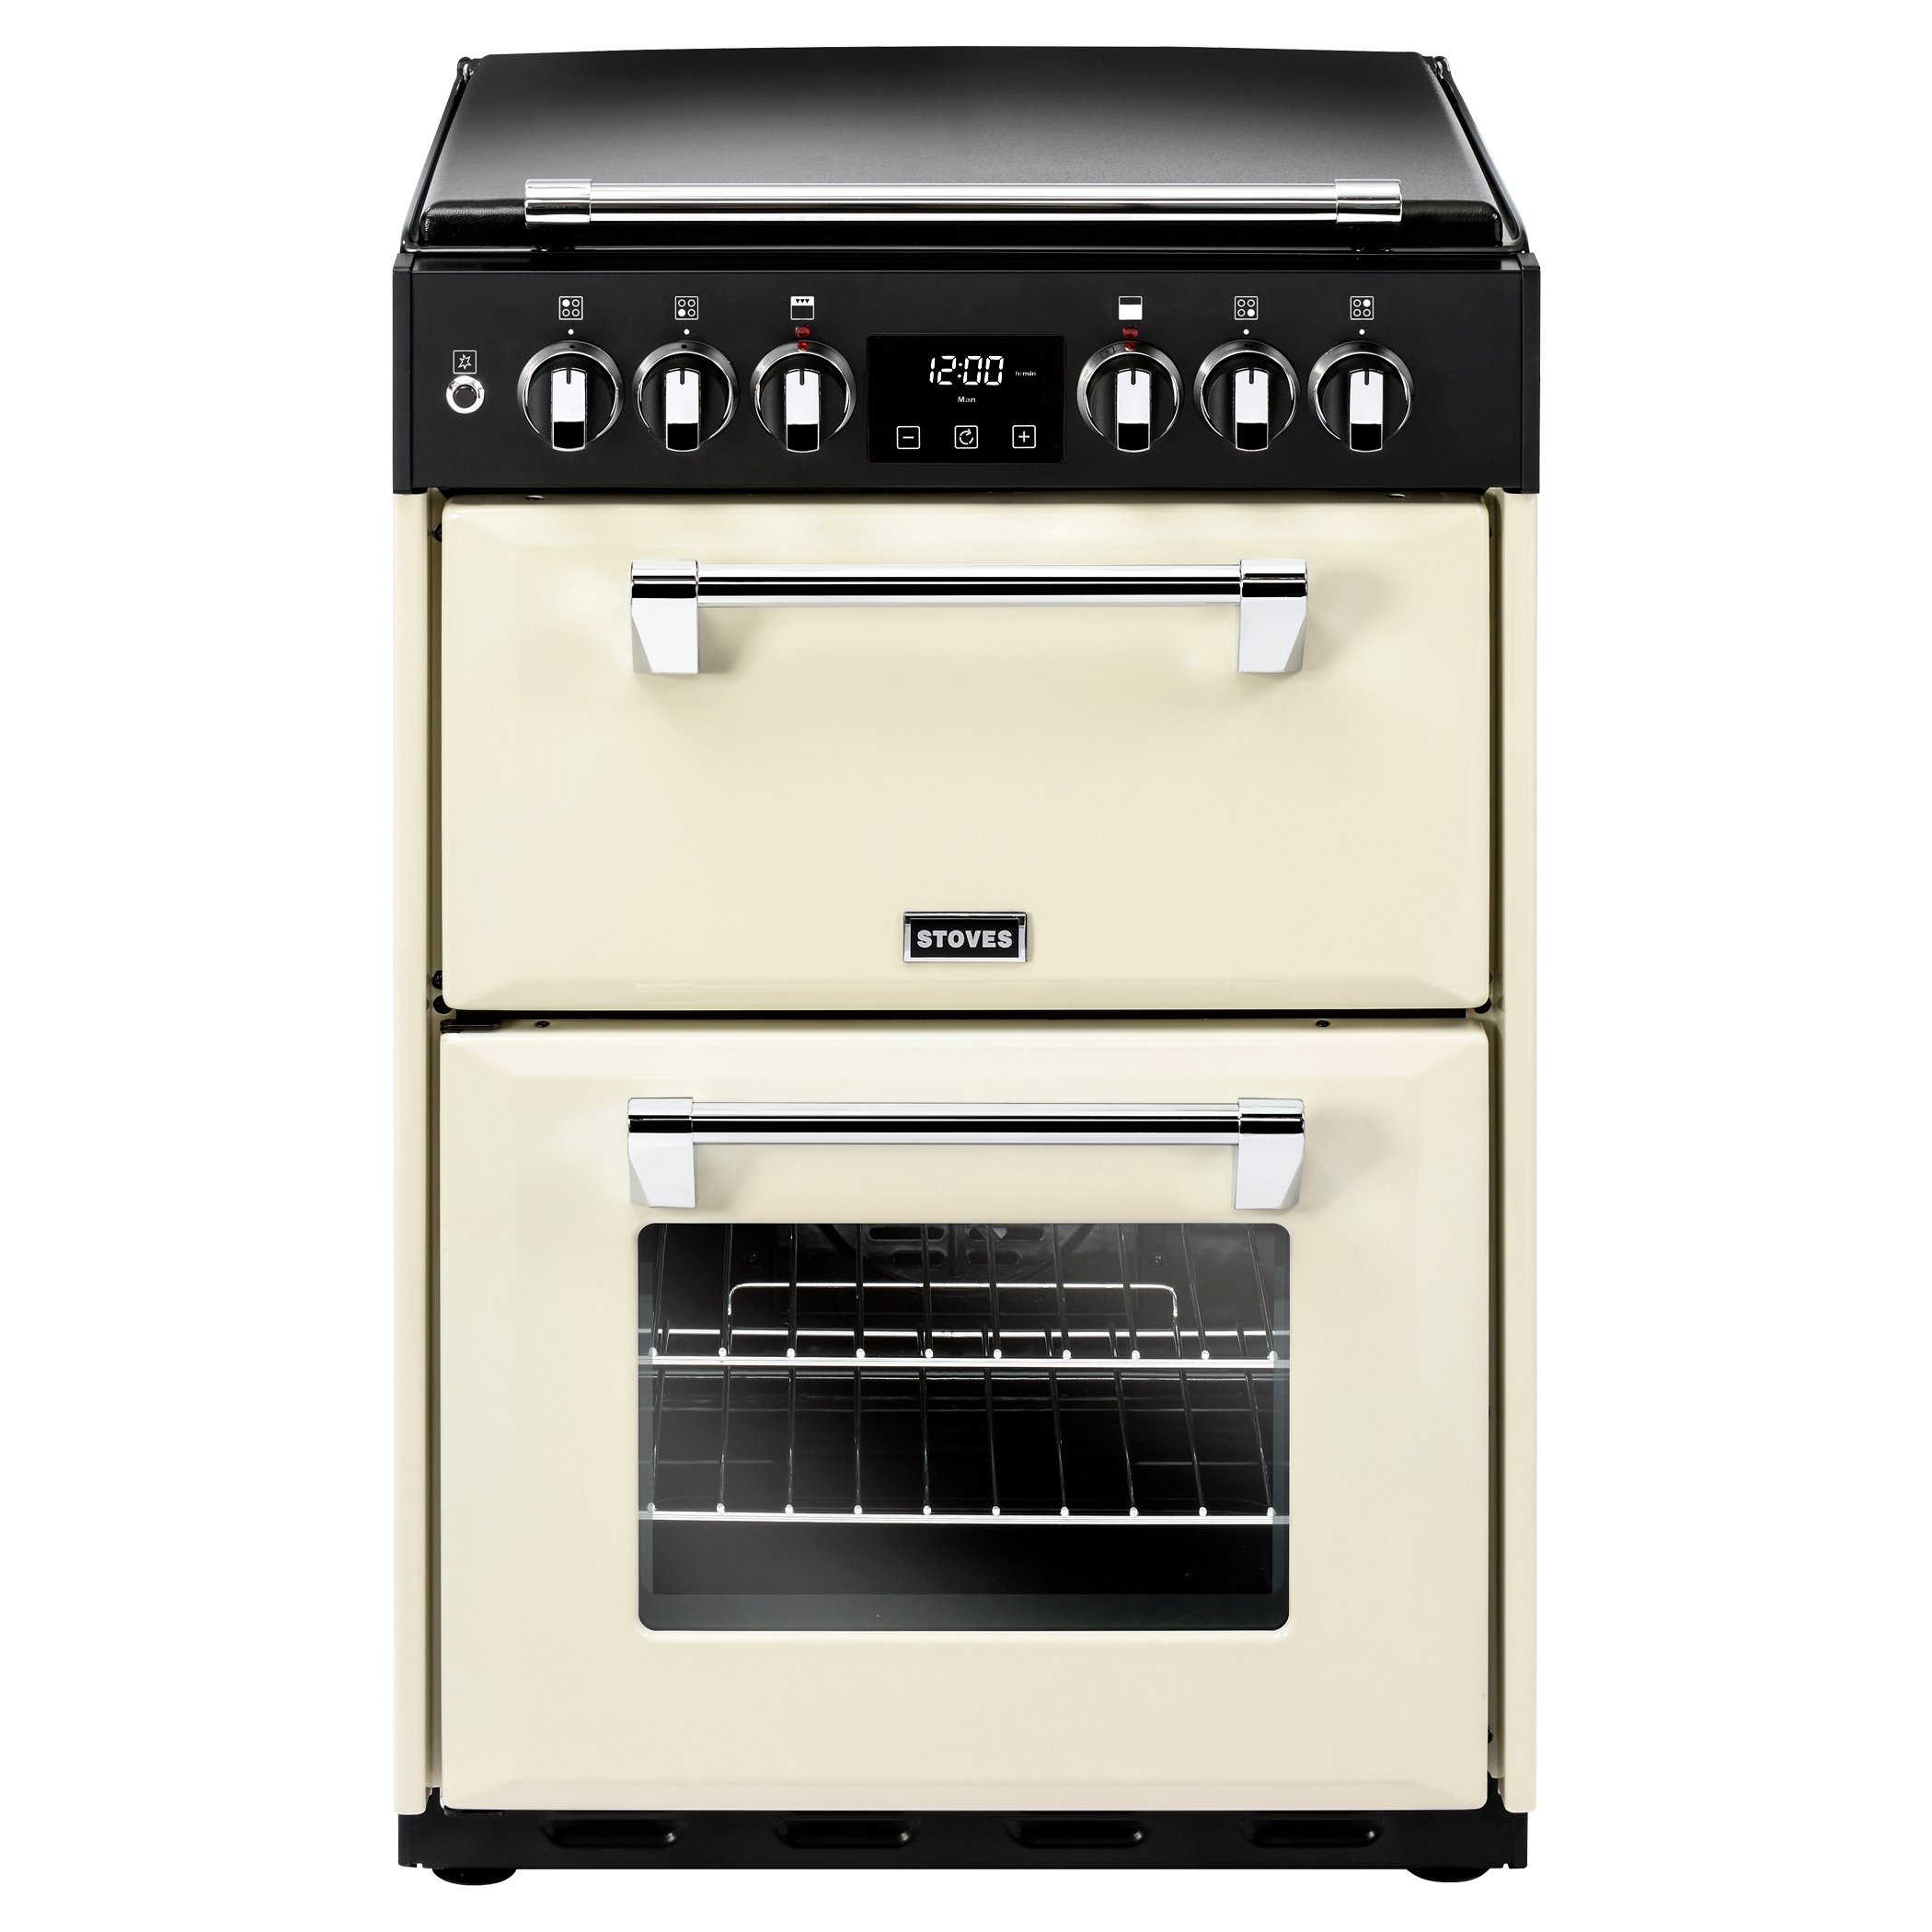 60cm Dual Fuel Range Cooker With Cast Aluminium Lid, 4 Burner Gas Hob, Conventional Oven & Grill and Fanned Main Oven